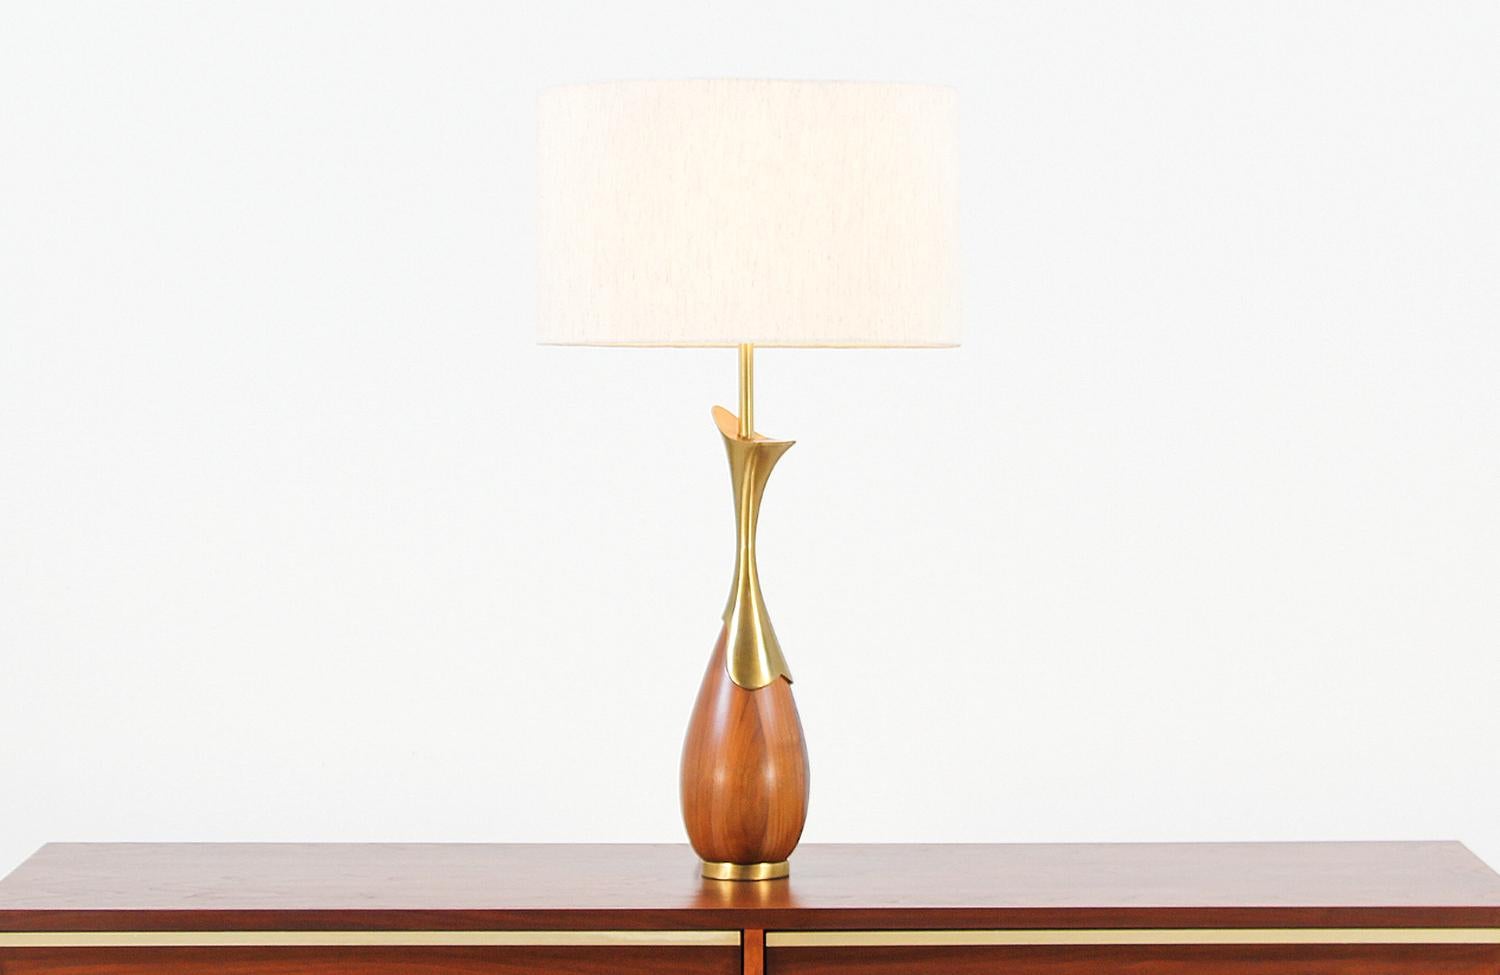 Elegant table lamp designed by Tony Paul for Westwood Industries in the United States, circa 1950s. This lovely large vintage lamp features a walnut wood body with brass detailing for an elegant lighting display. The tear-shaped body sits on a brass